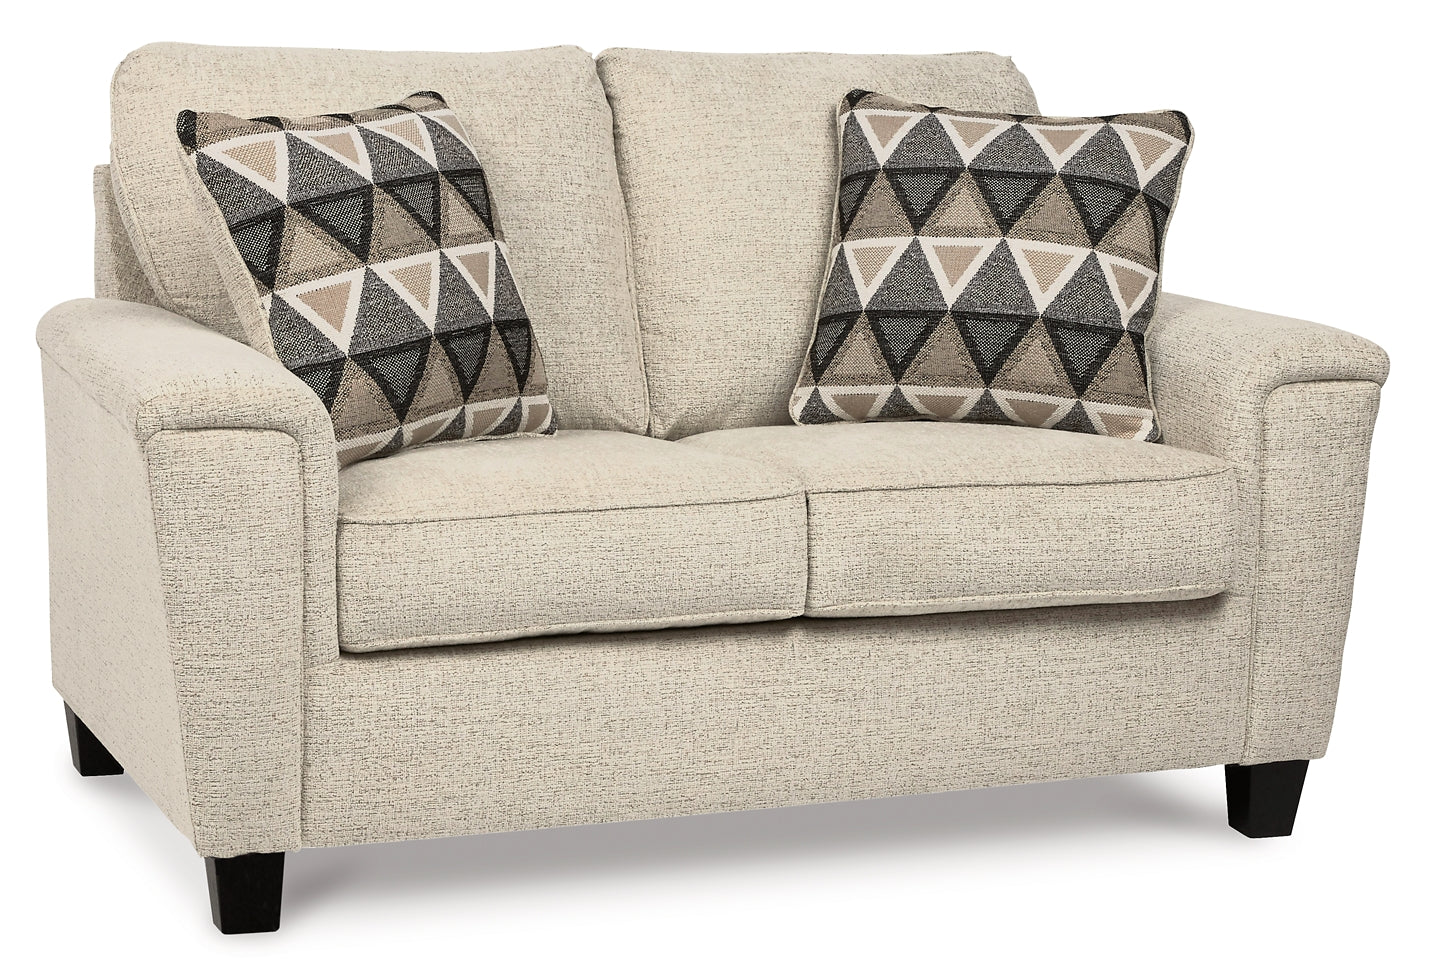 Abinger Sofa, Loveseat and Chair Signature Design by Ashley®